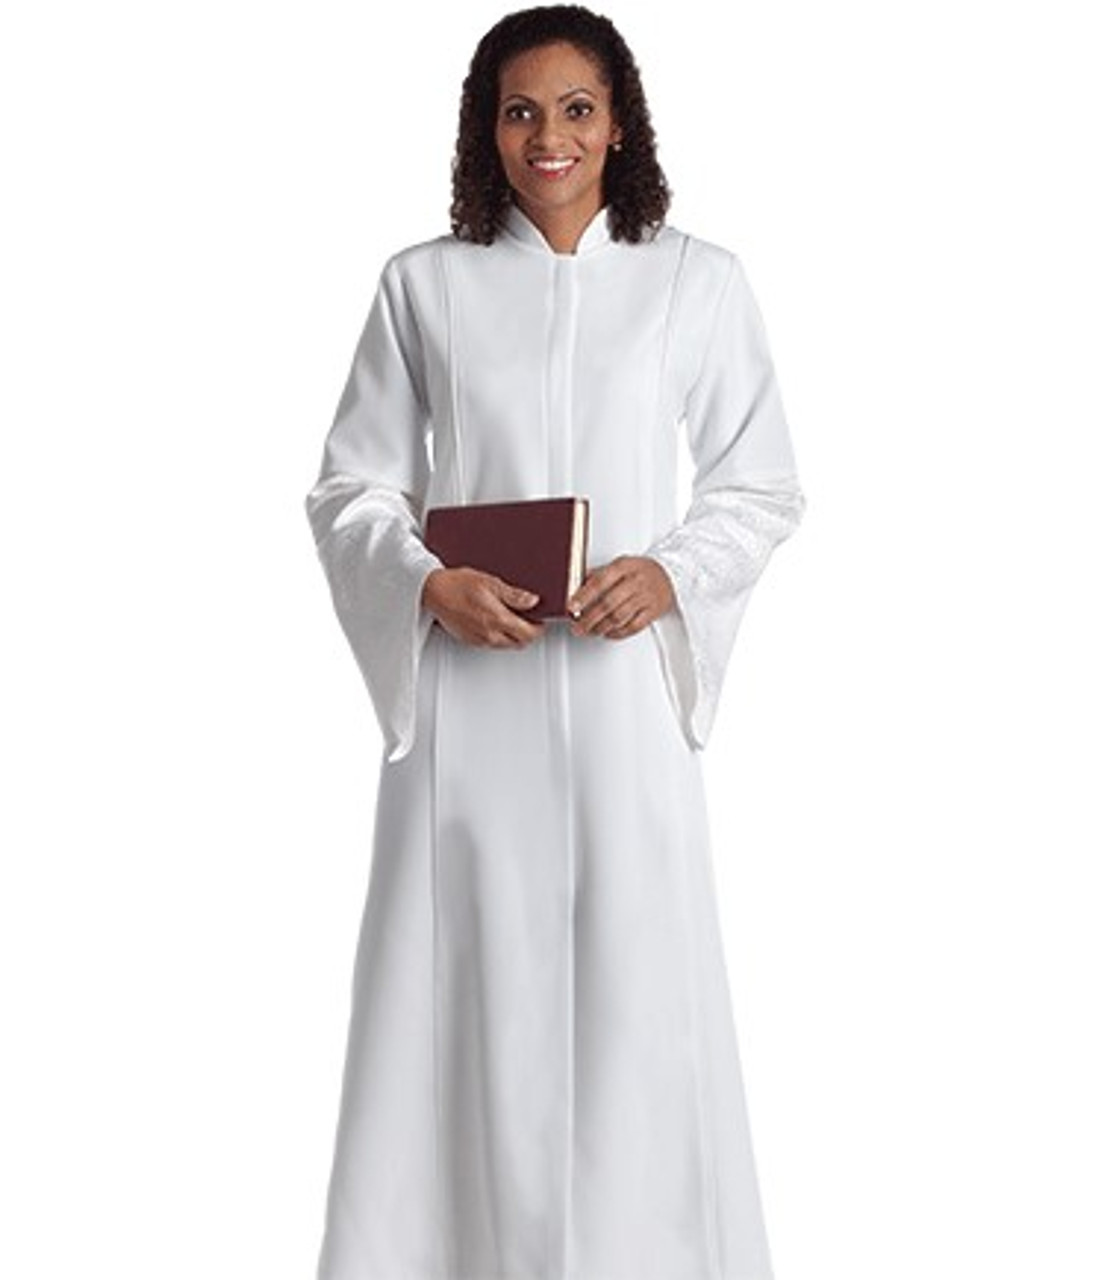 Priest ALB Church Garment Clergy Alb Priest White Vestment Worship Albs Robe  Gown Clerical Liturgical Clothing Pastor - AliExpress